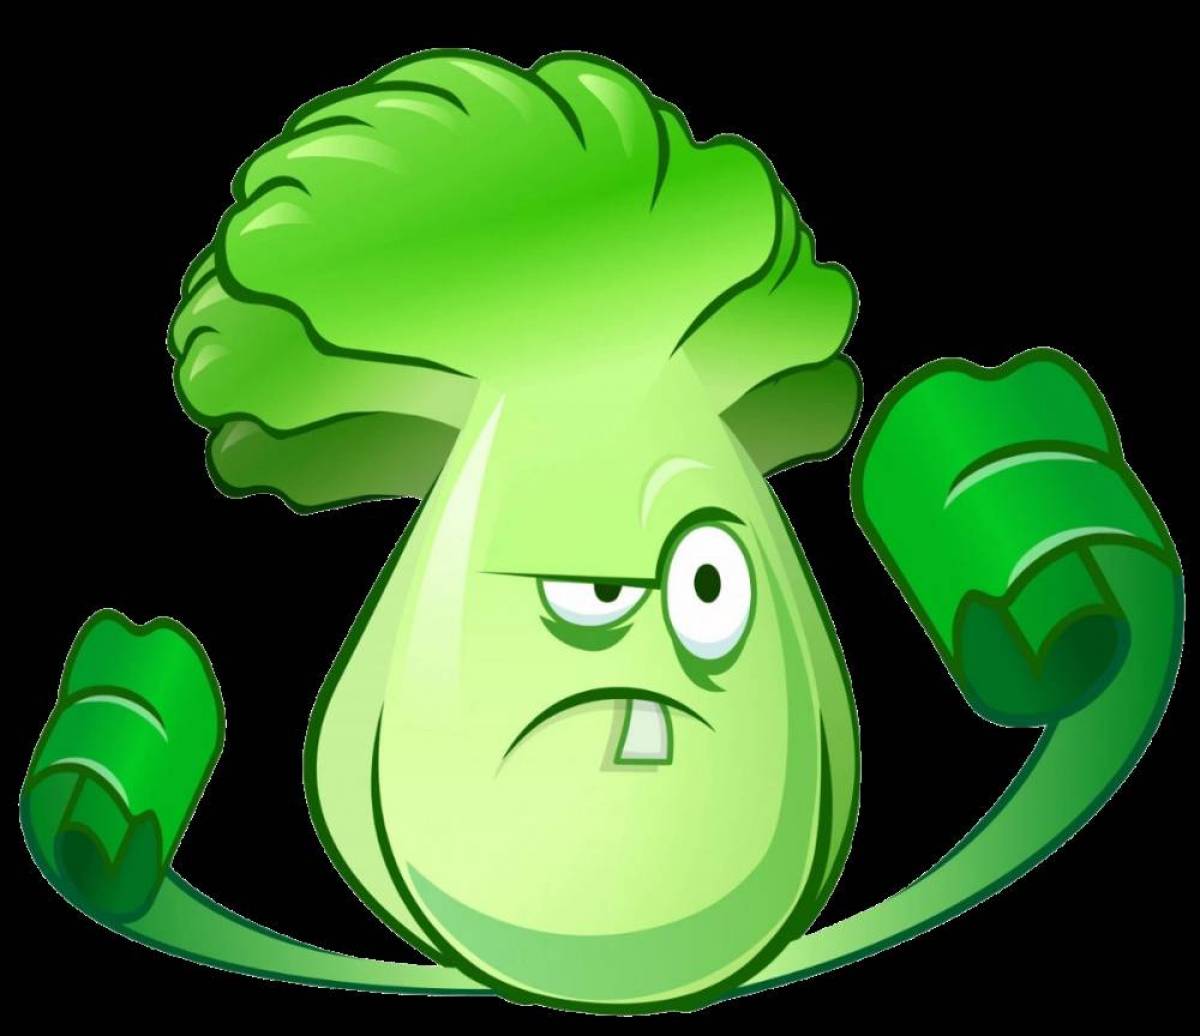 Plants vs zombies for steam фото 109